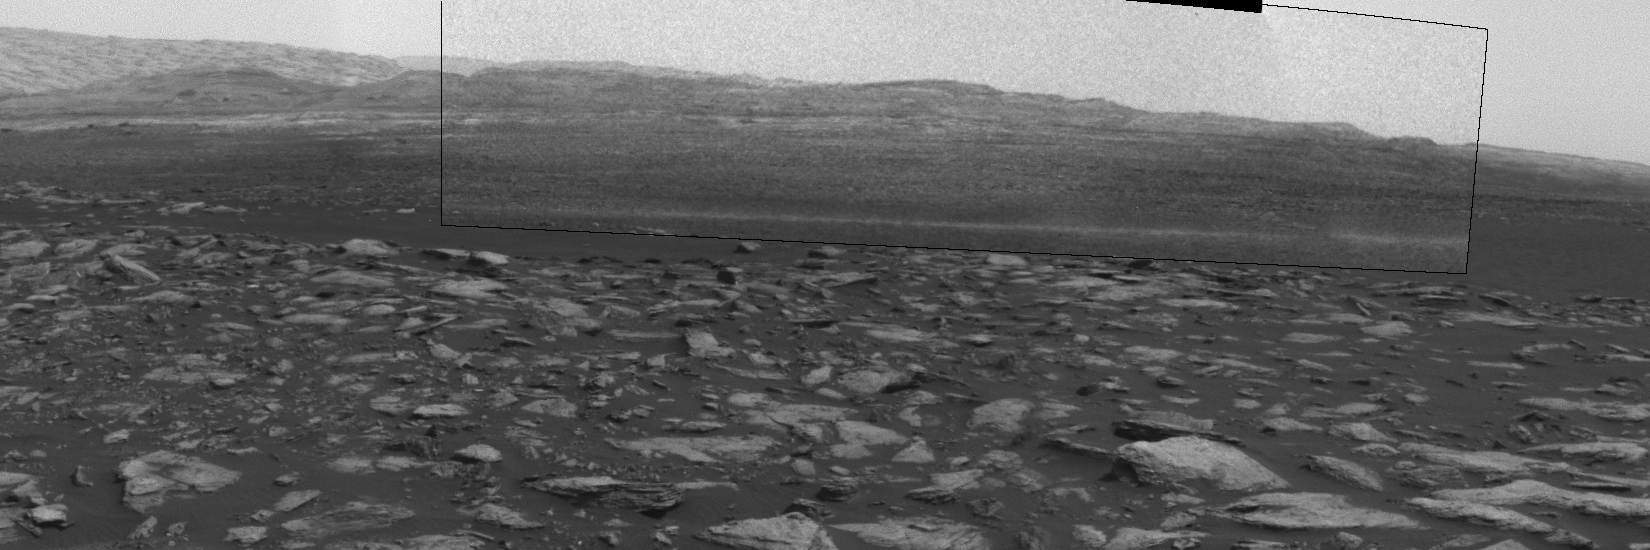 Animated sequence from NASA’s Curiosity Rover of a dust-carrying whirlwind, called a dust devil making way across the Martian landscape at Gale Crater on, Sol 1597 or 2/1/17. (NASA/JPL/Caltech)